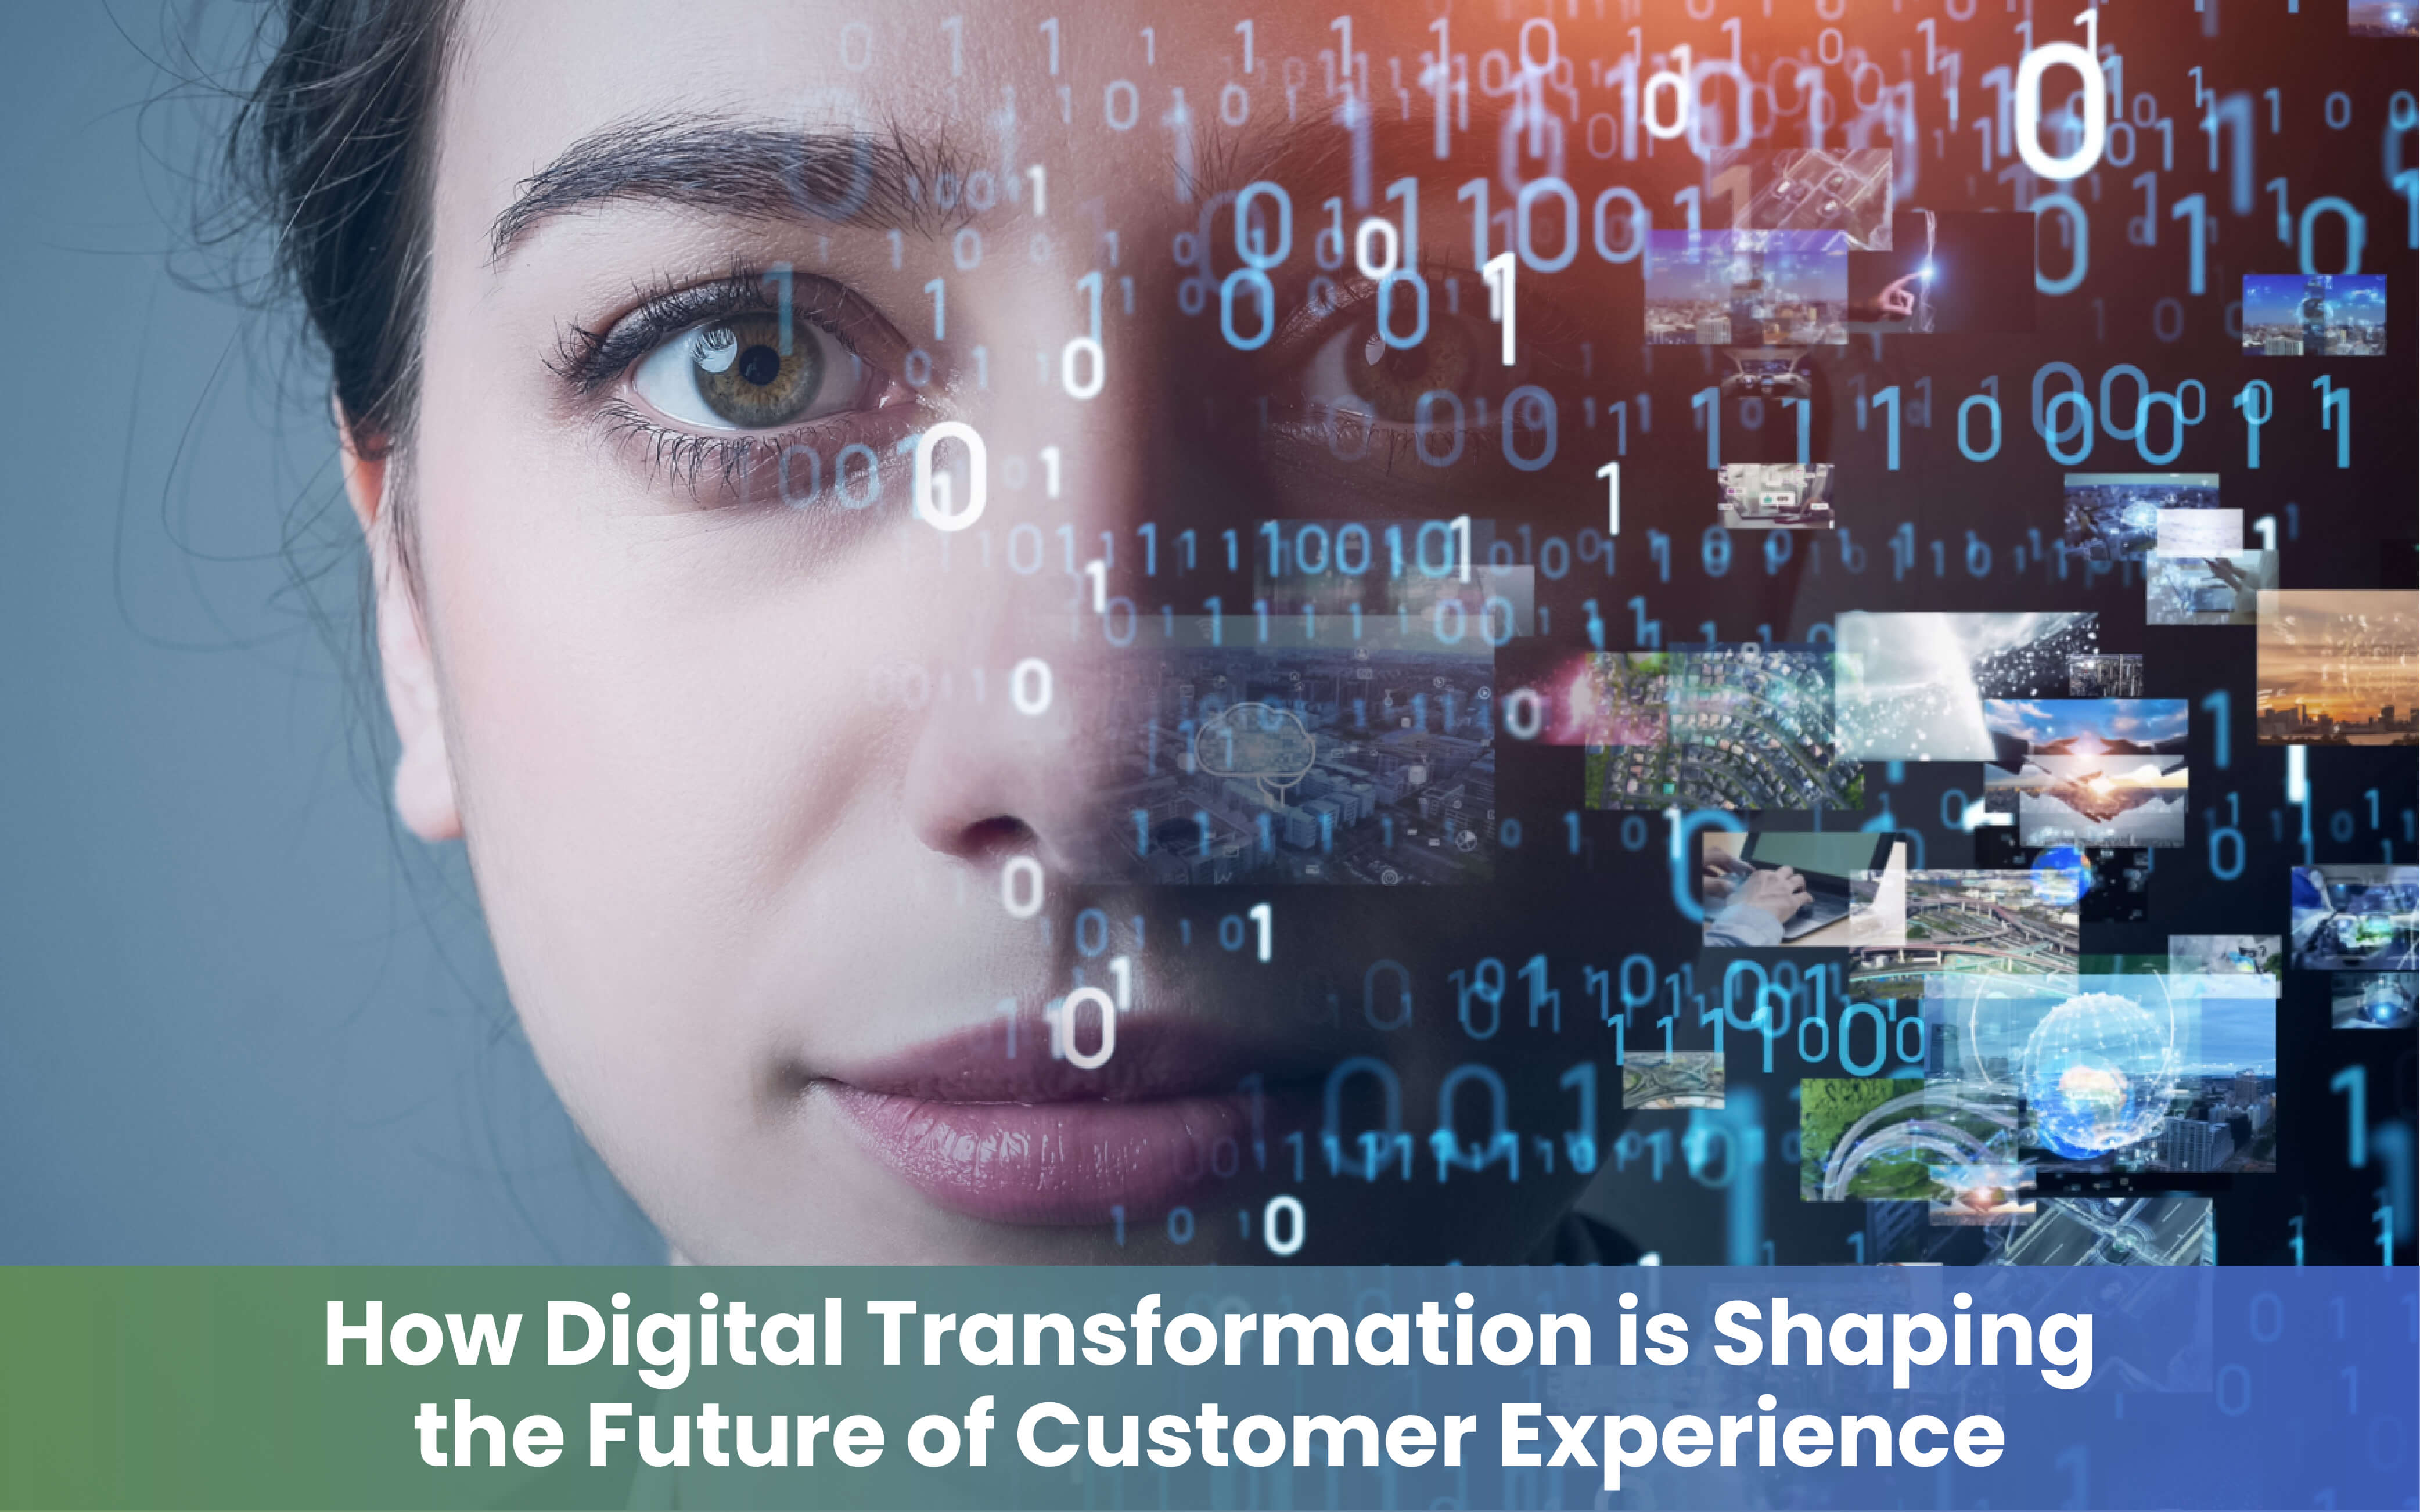 How Digital Transformation is Shaping the Future of Customer Experience?